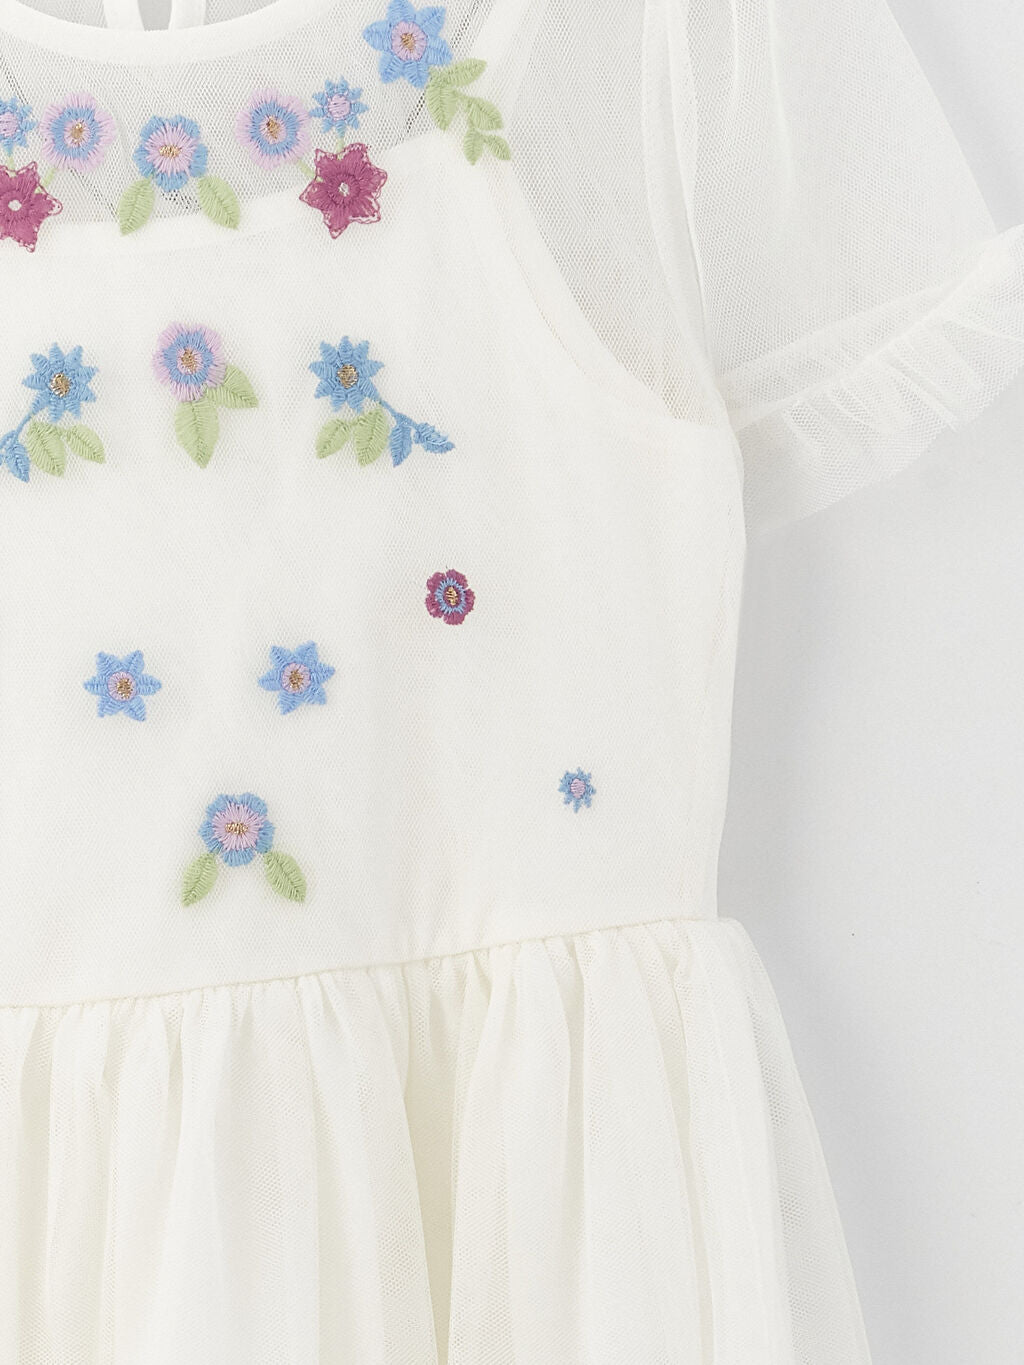 Crew Neck Embroidery Detailed Short Sleeve Girl's Dress